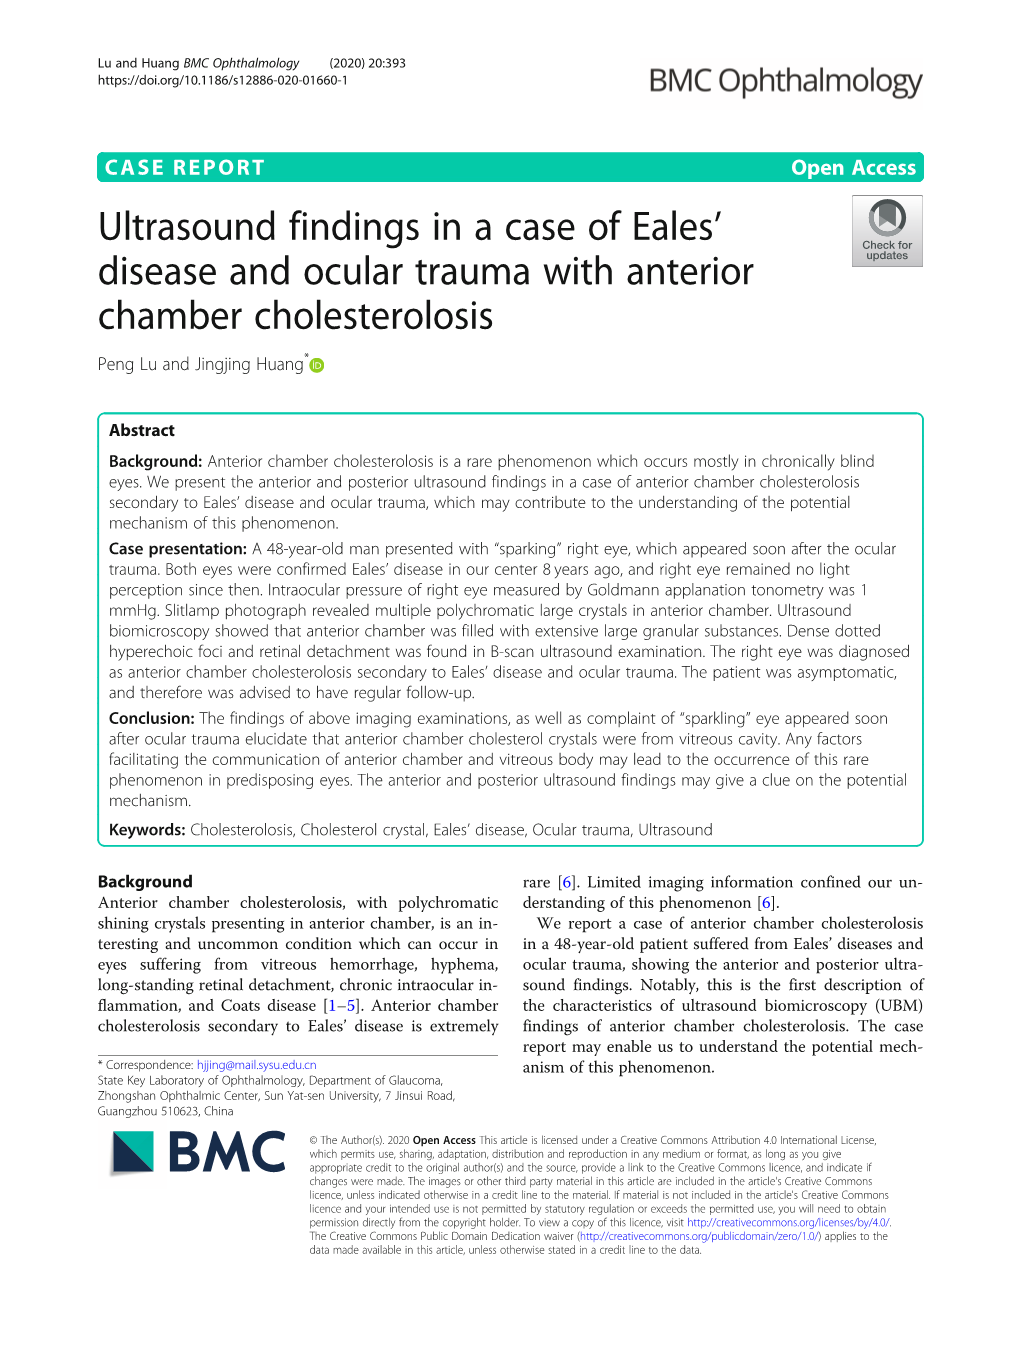 Ultrasound Findings in a Case of Eales' Disease and Ocular Trauma